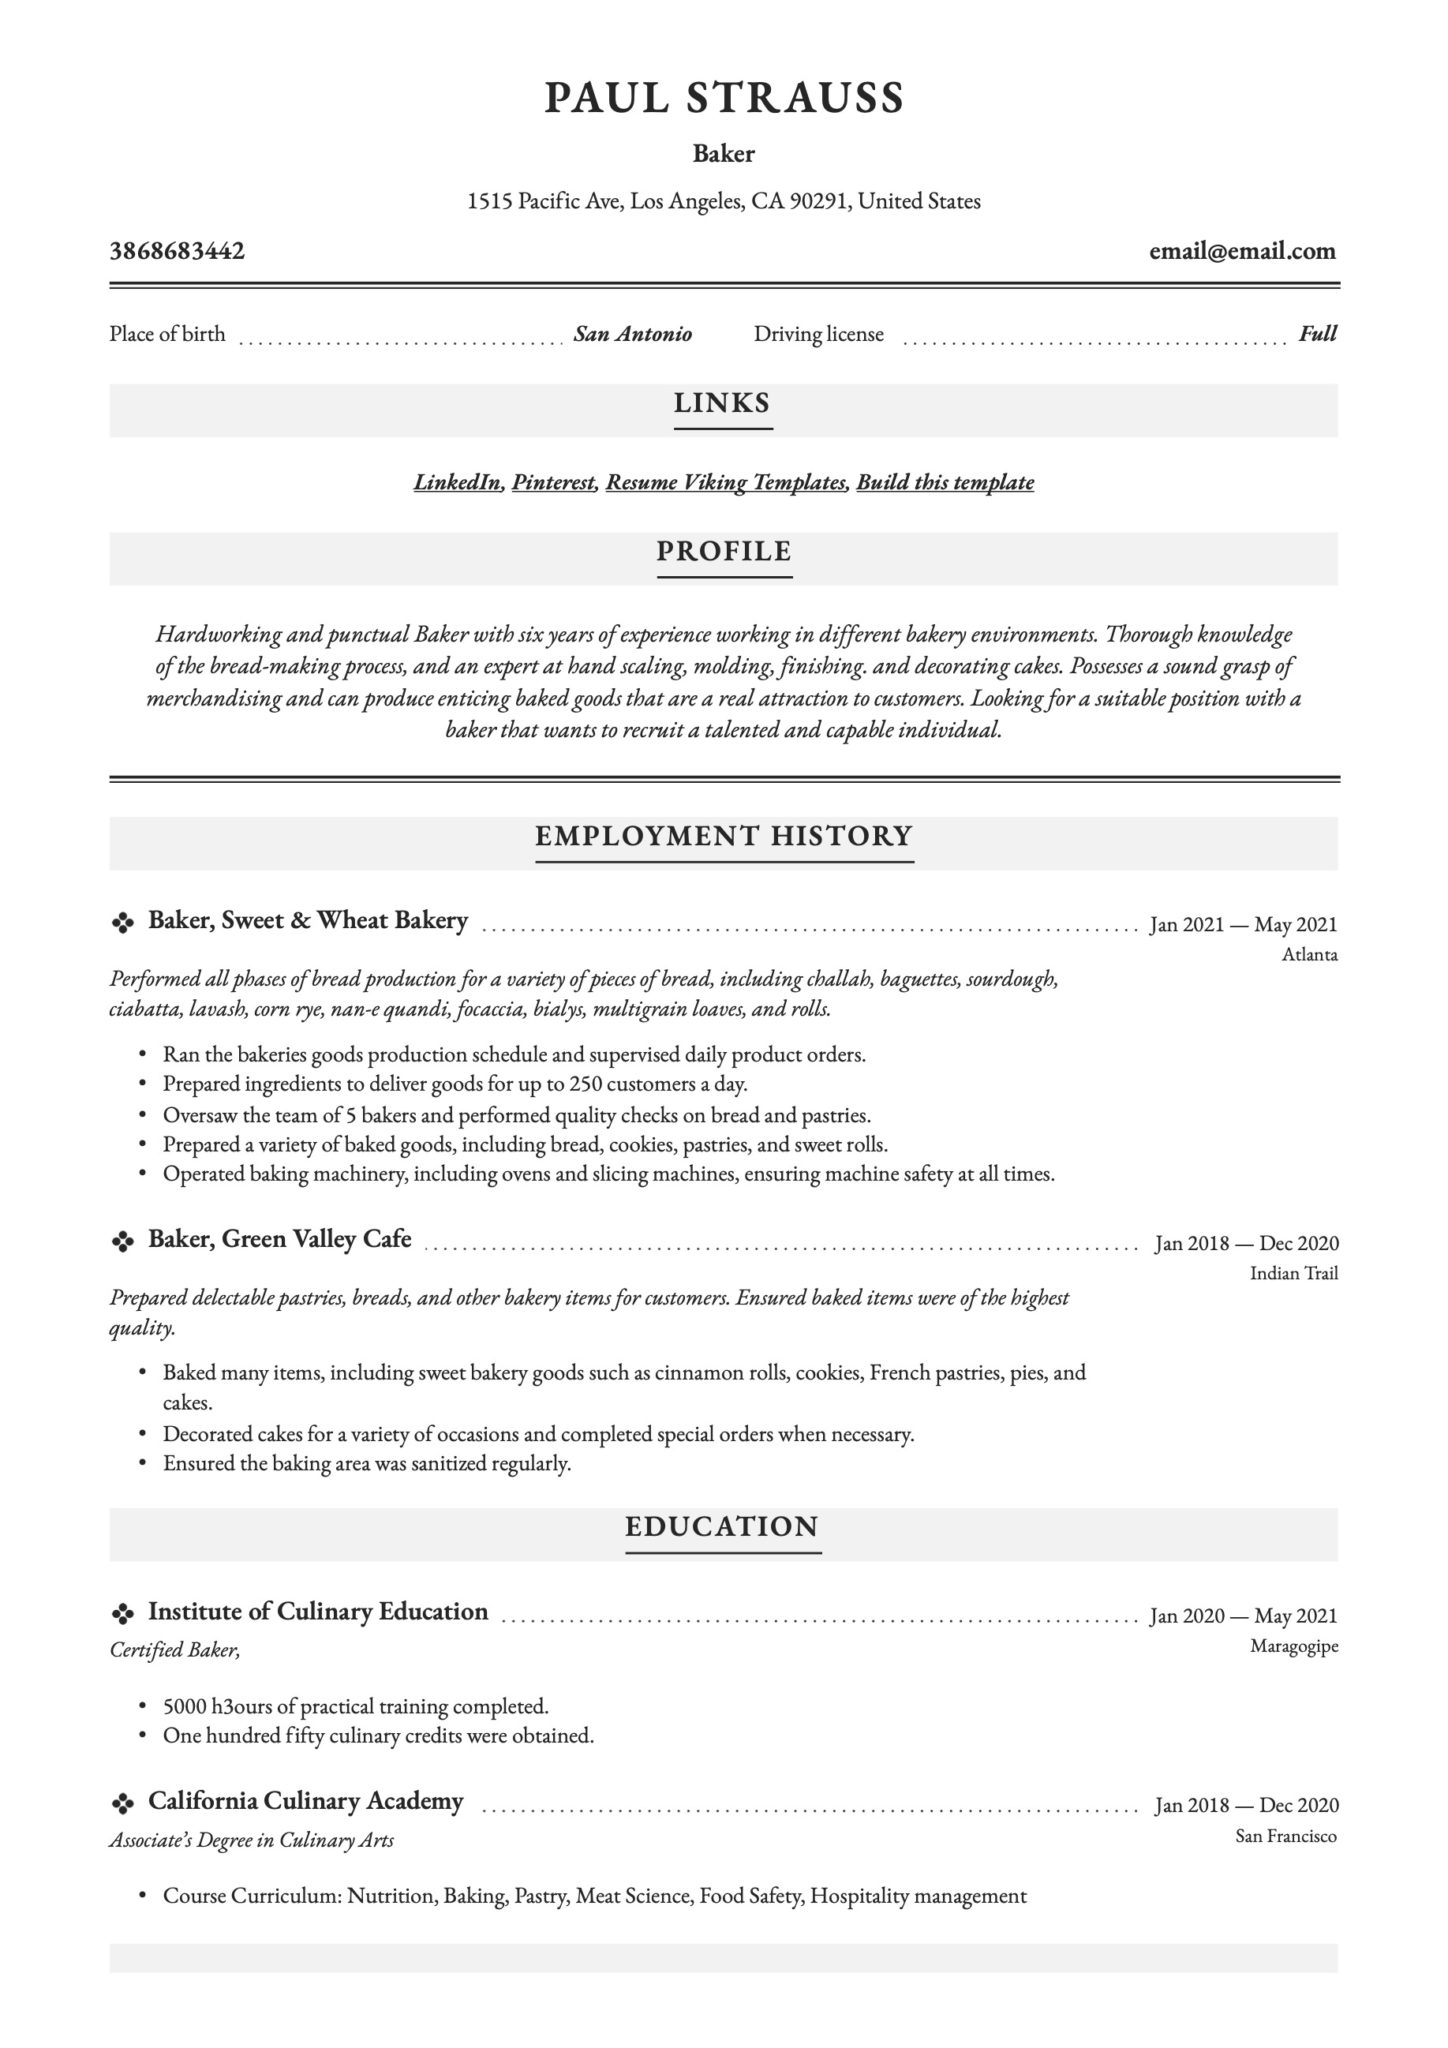 Professional Baker Resume Example